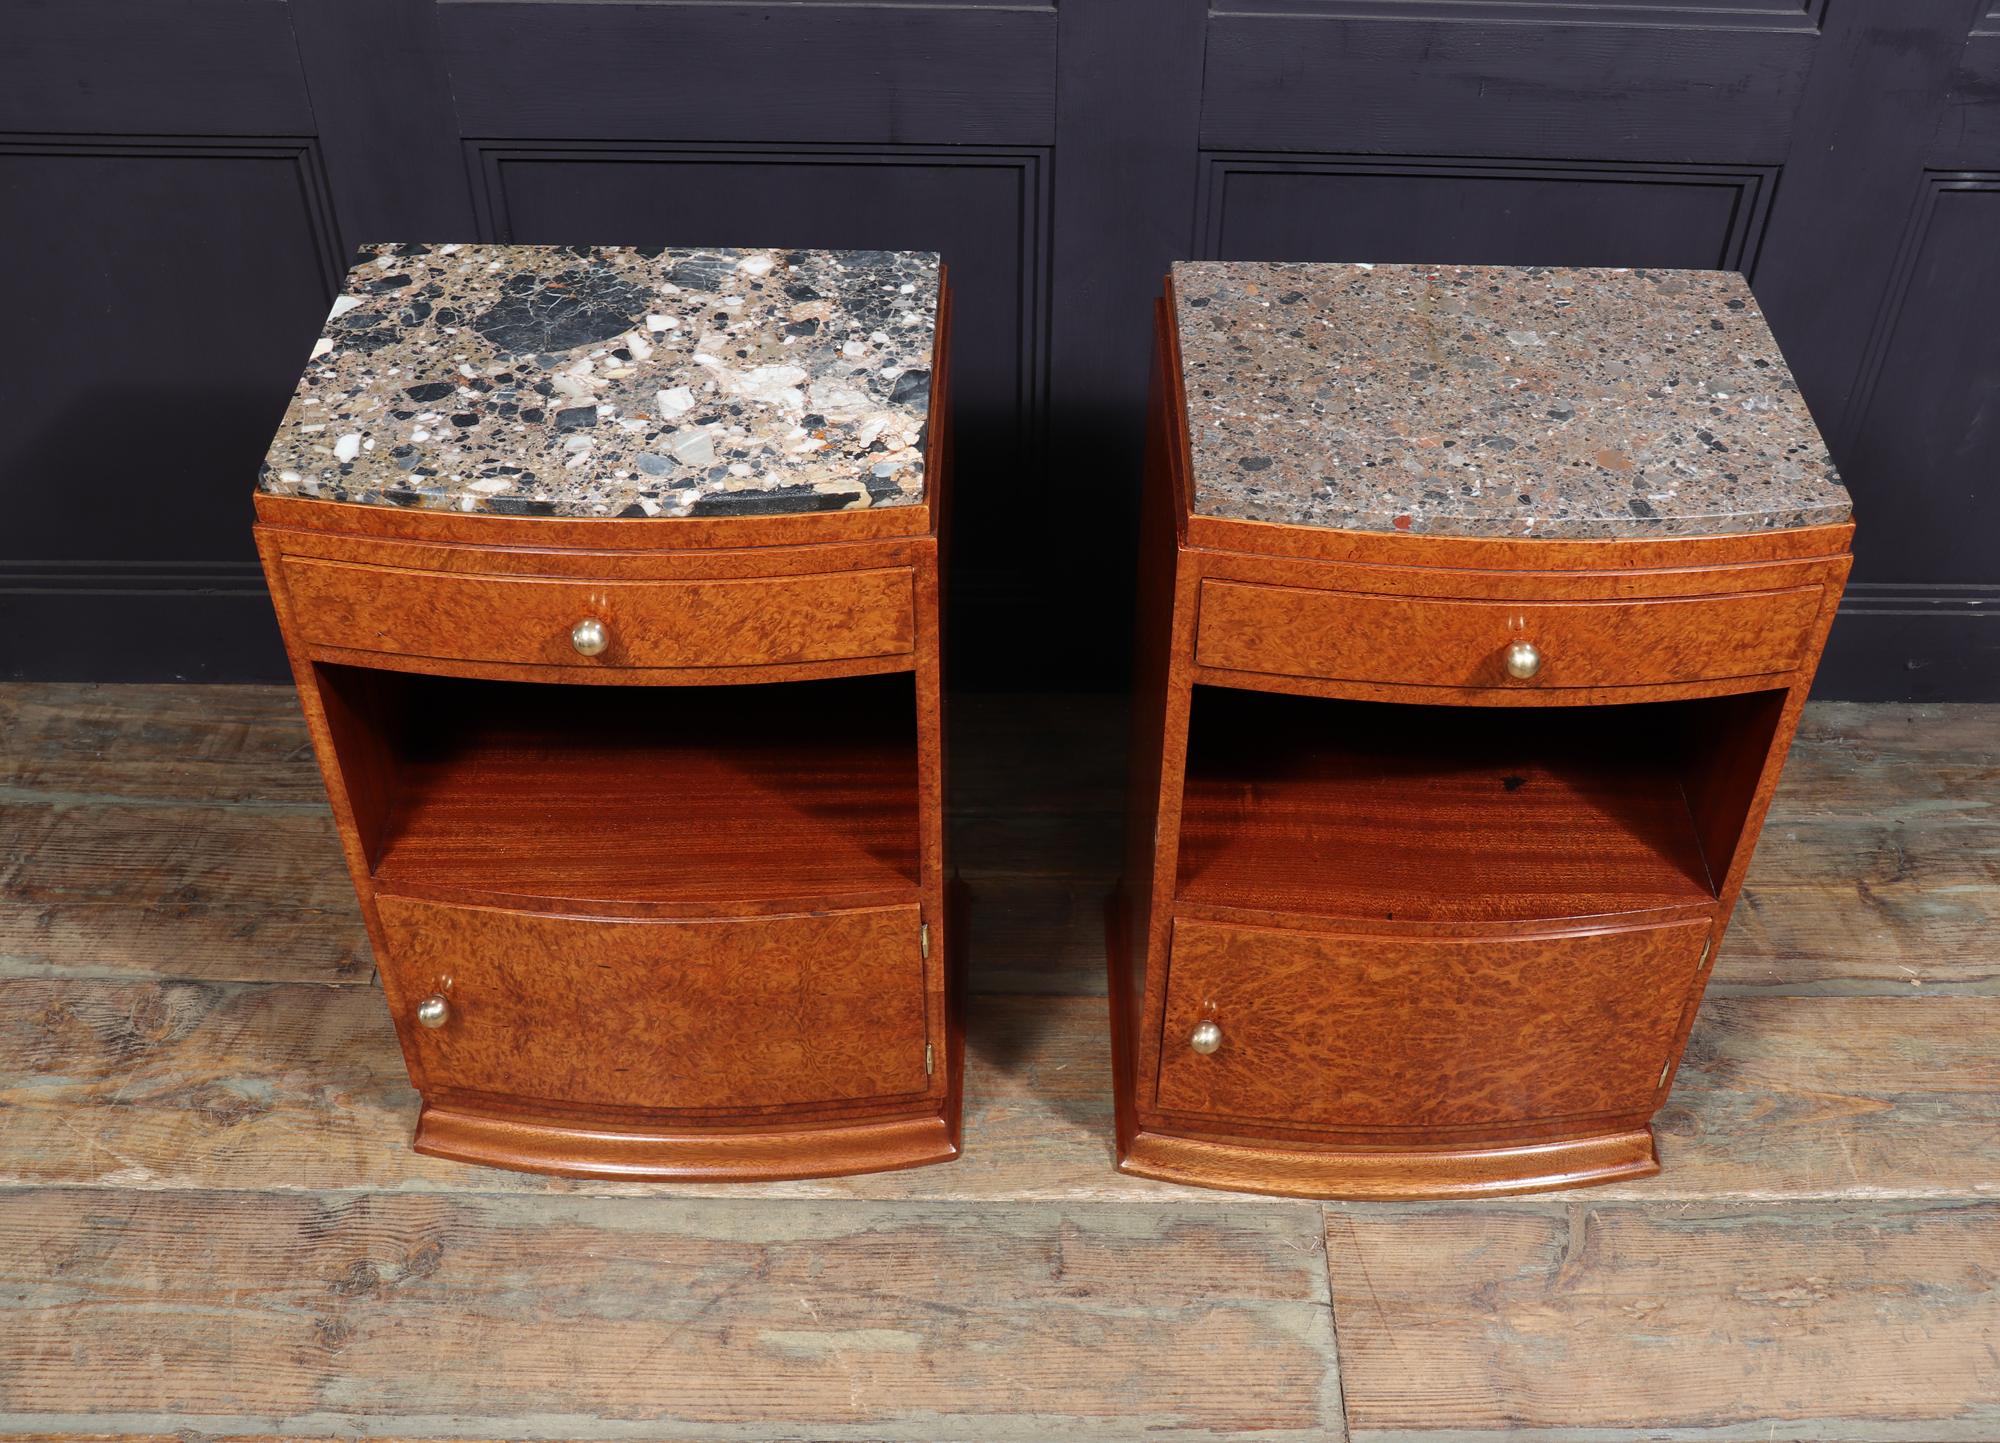 ART DECO BEDSIDE CABINETS
A pair of French bow fronted Art Deco bedside cabinets, produced in France in the mid 1920’s in Amboyna the cabinets have marble tops with single drawer below then a shelf and cupboard door below this with original bronze